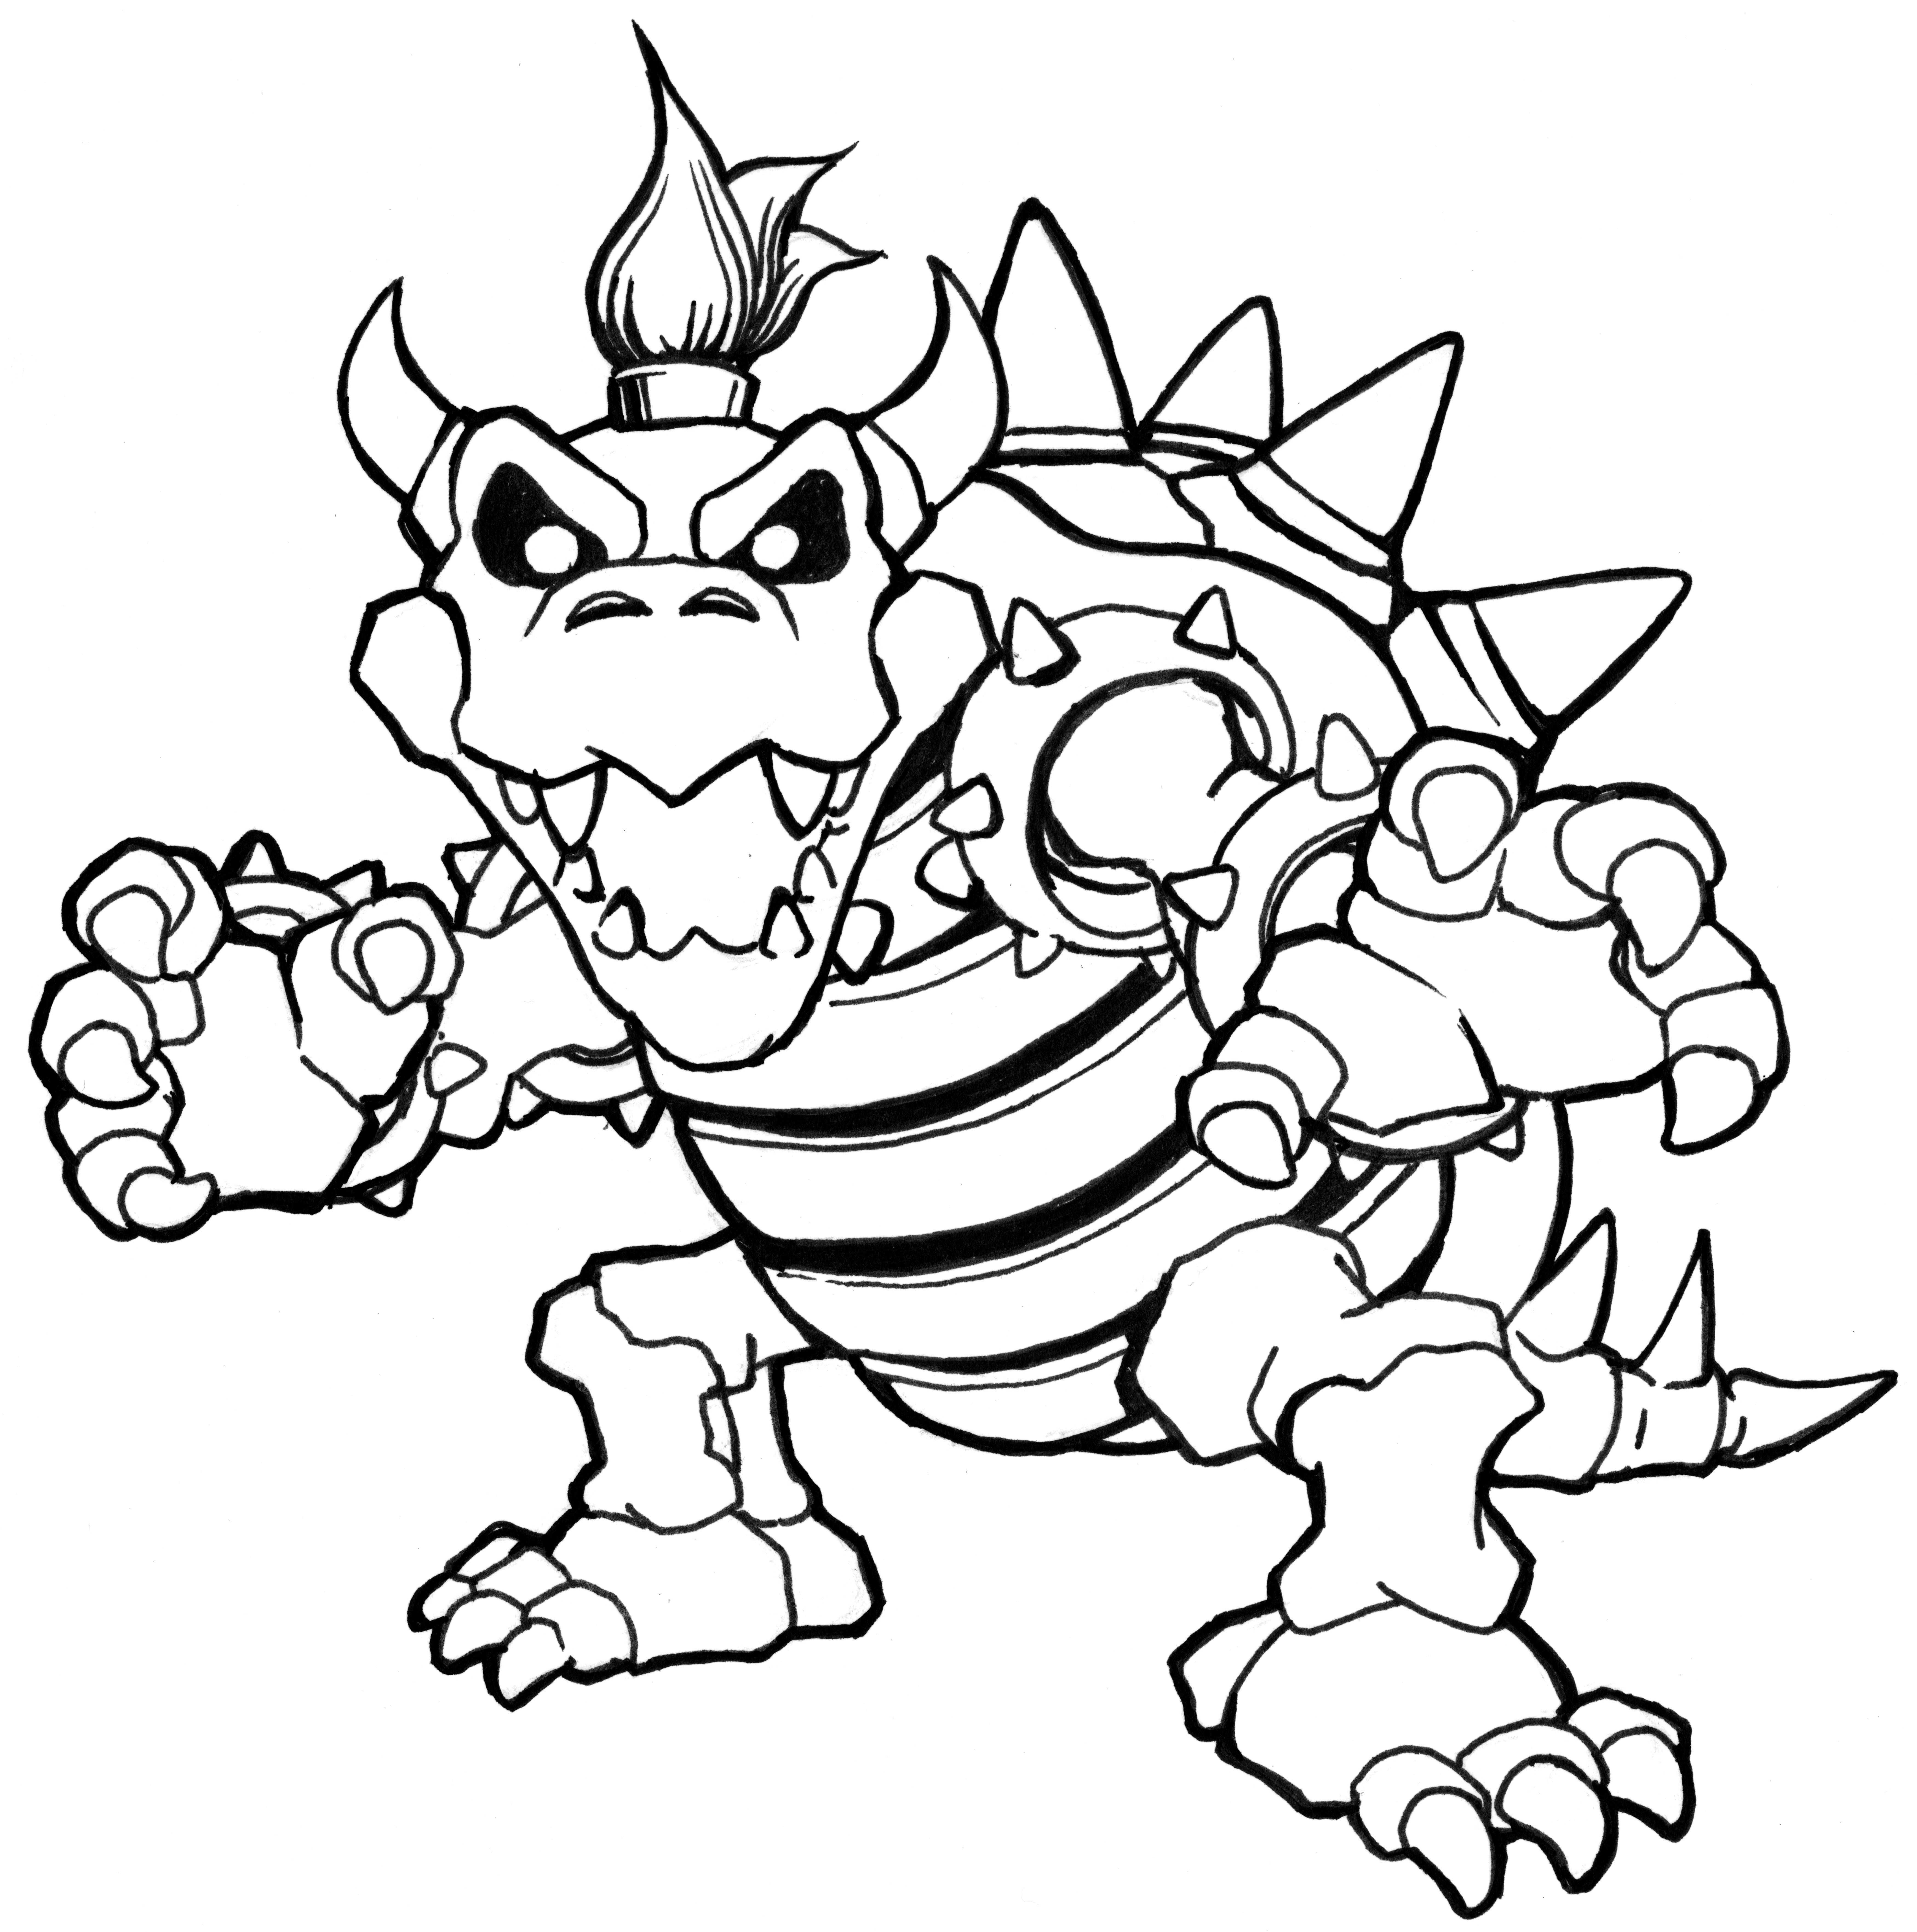 Bowser Coloring Bowser Coloring Pages Dry Bowser Mario Coloring Pages Baby Bowser Coloring Pages Coloriage Ninja Coloriage Pokemon Coloriage Maison